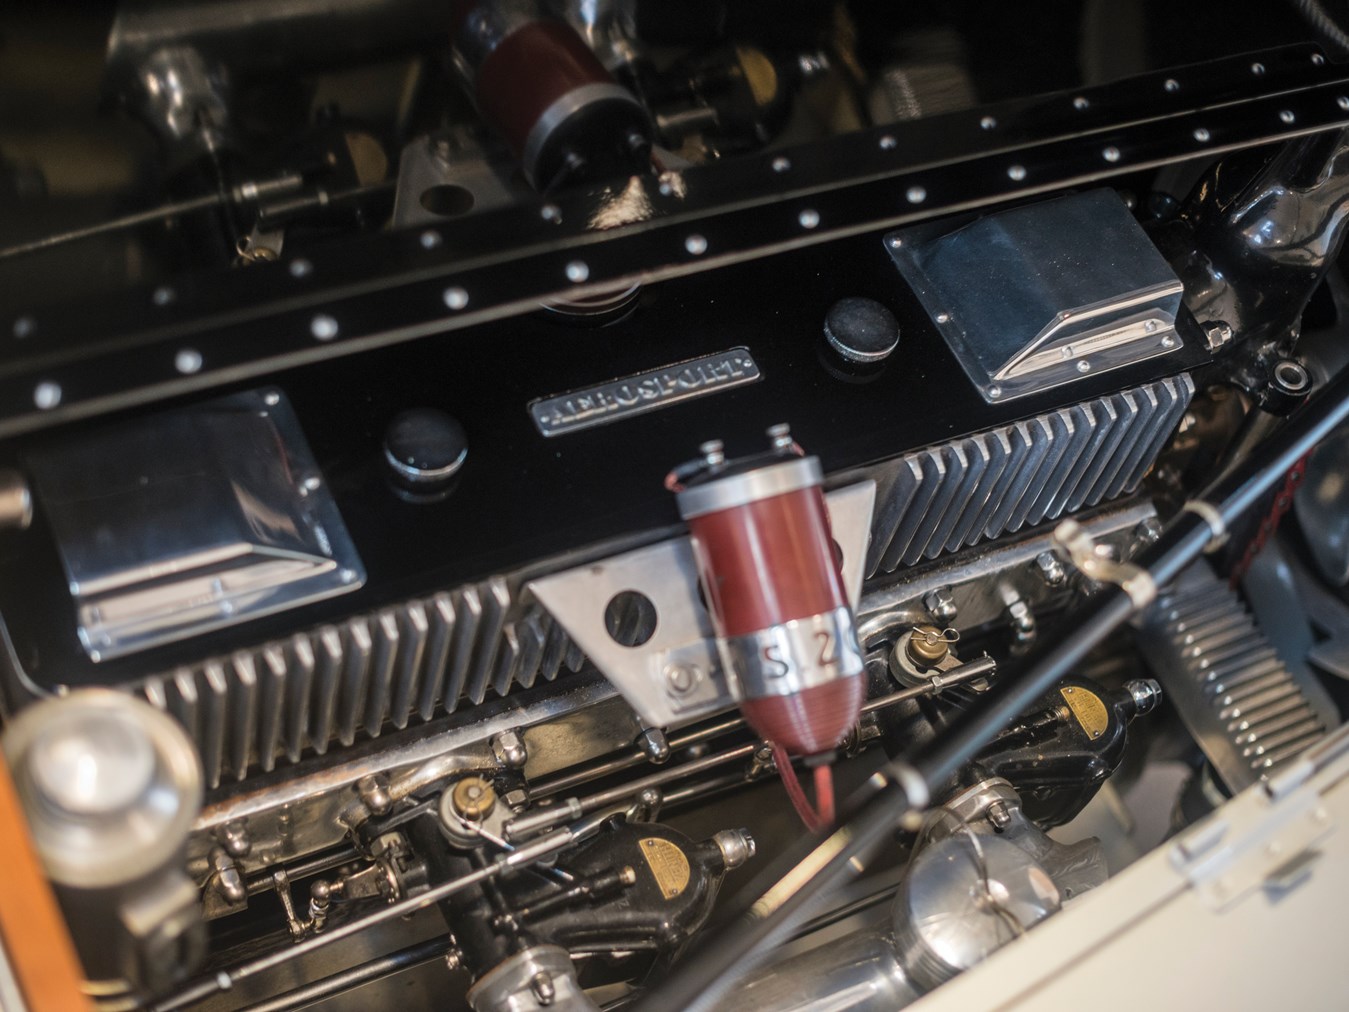 The 3.3 litre Voisin sleeve valve engine may look conventional but it isn't, and it is very quiet in operation.